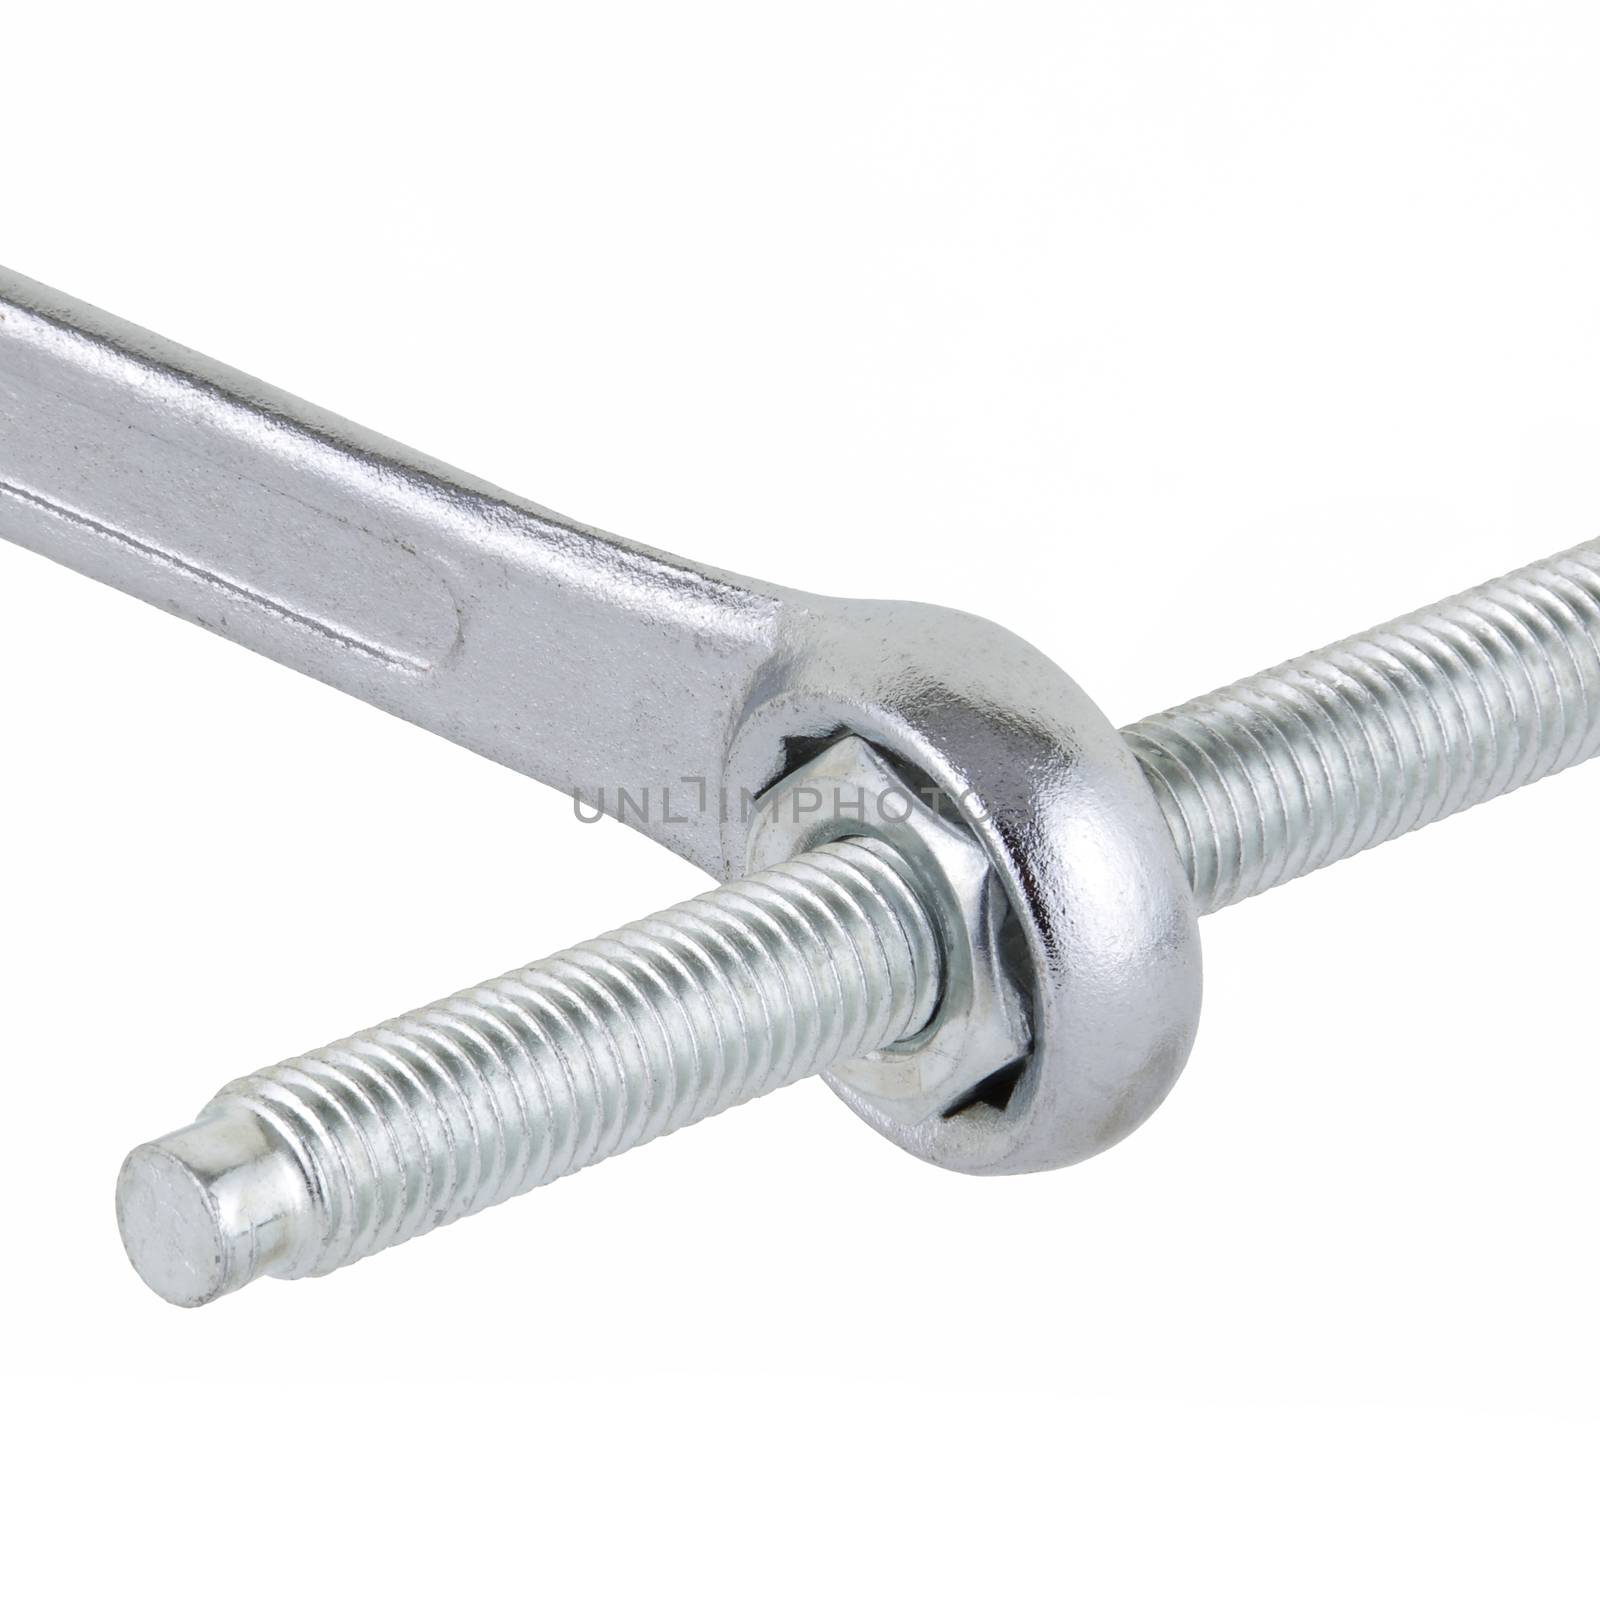 A ring spanner box end wrench with nut and bolt